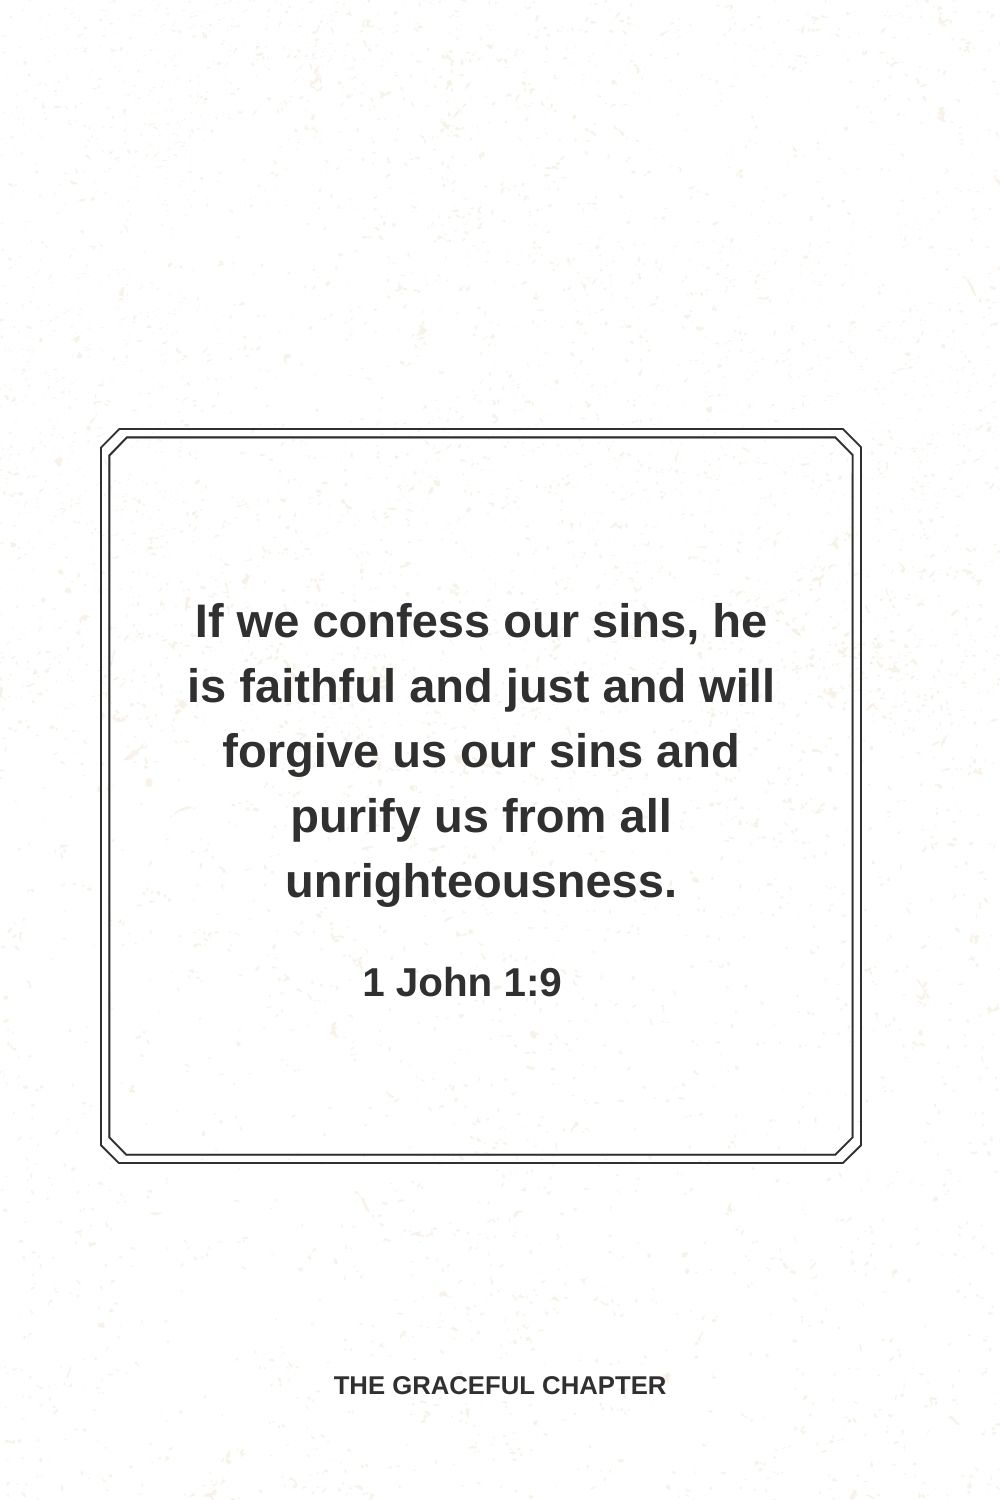 If we confess our sins, he is faithful and just and will forgive us our sins and purify us from all unrighteousness. 1 John 1:9